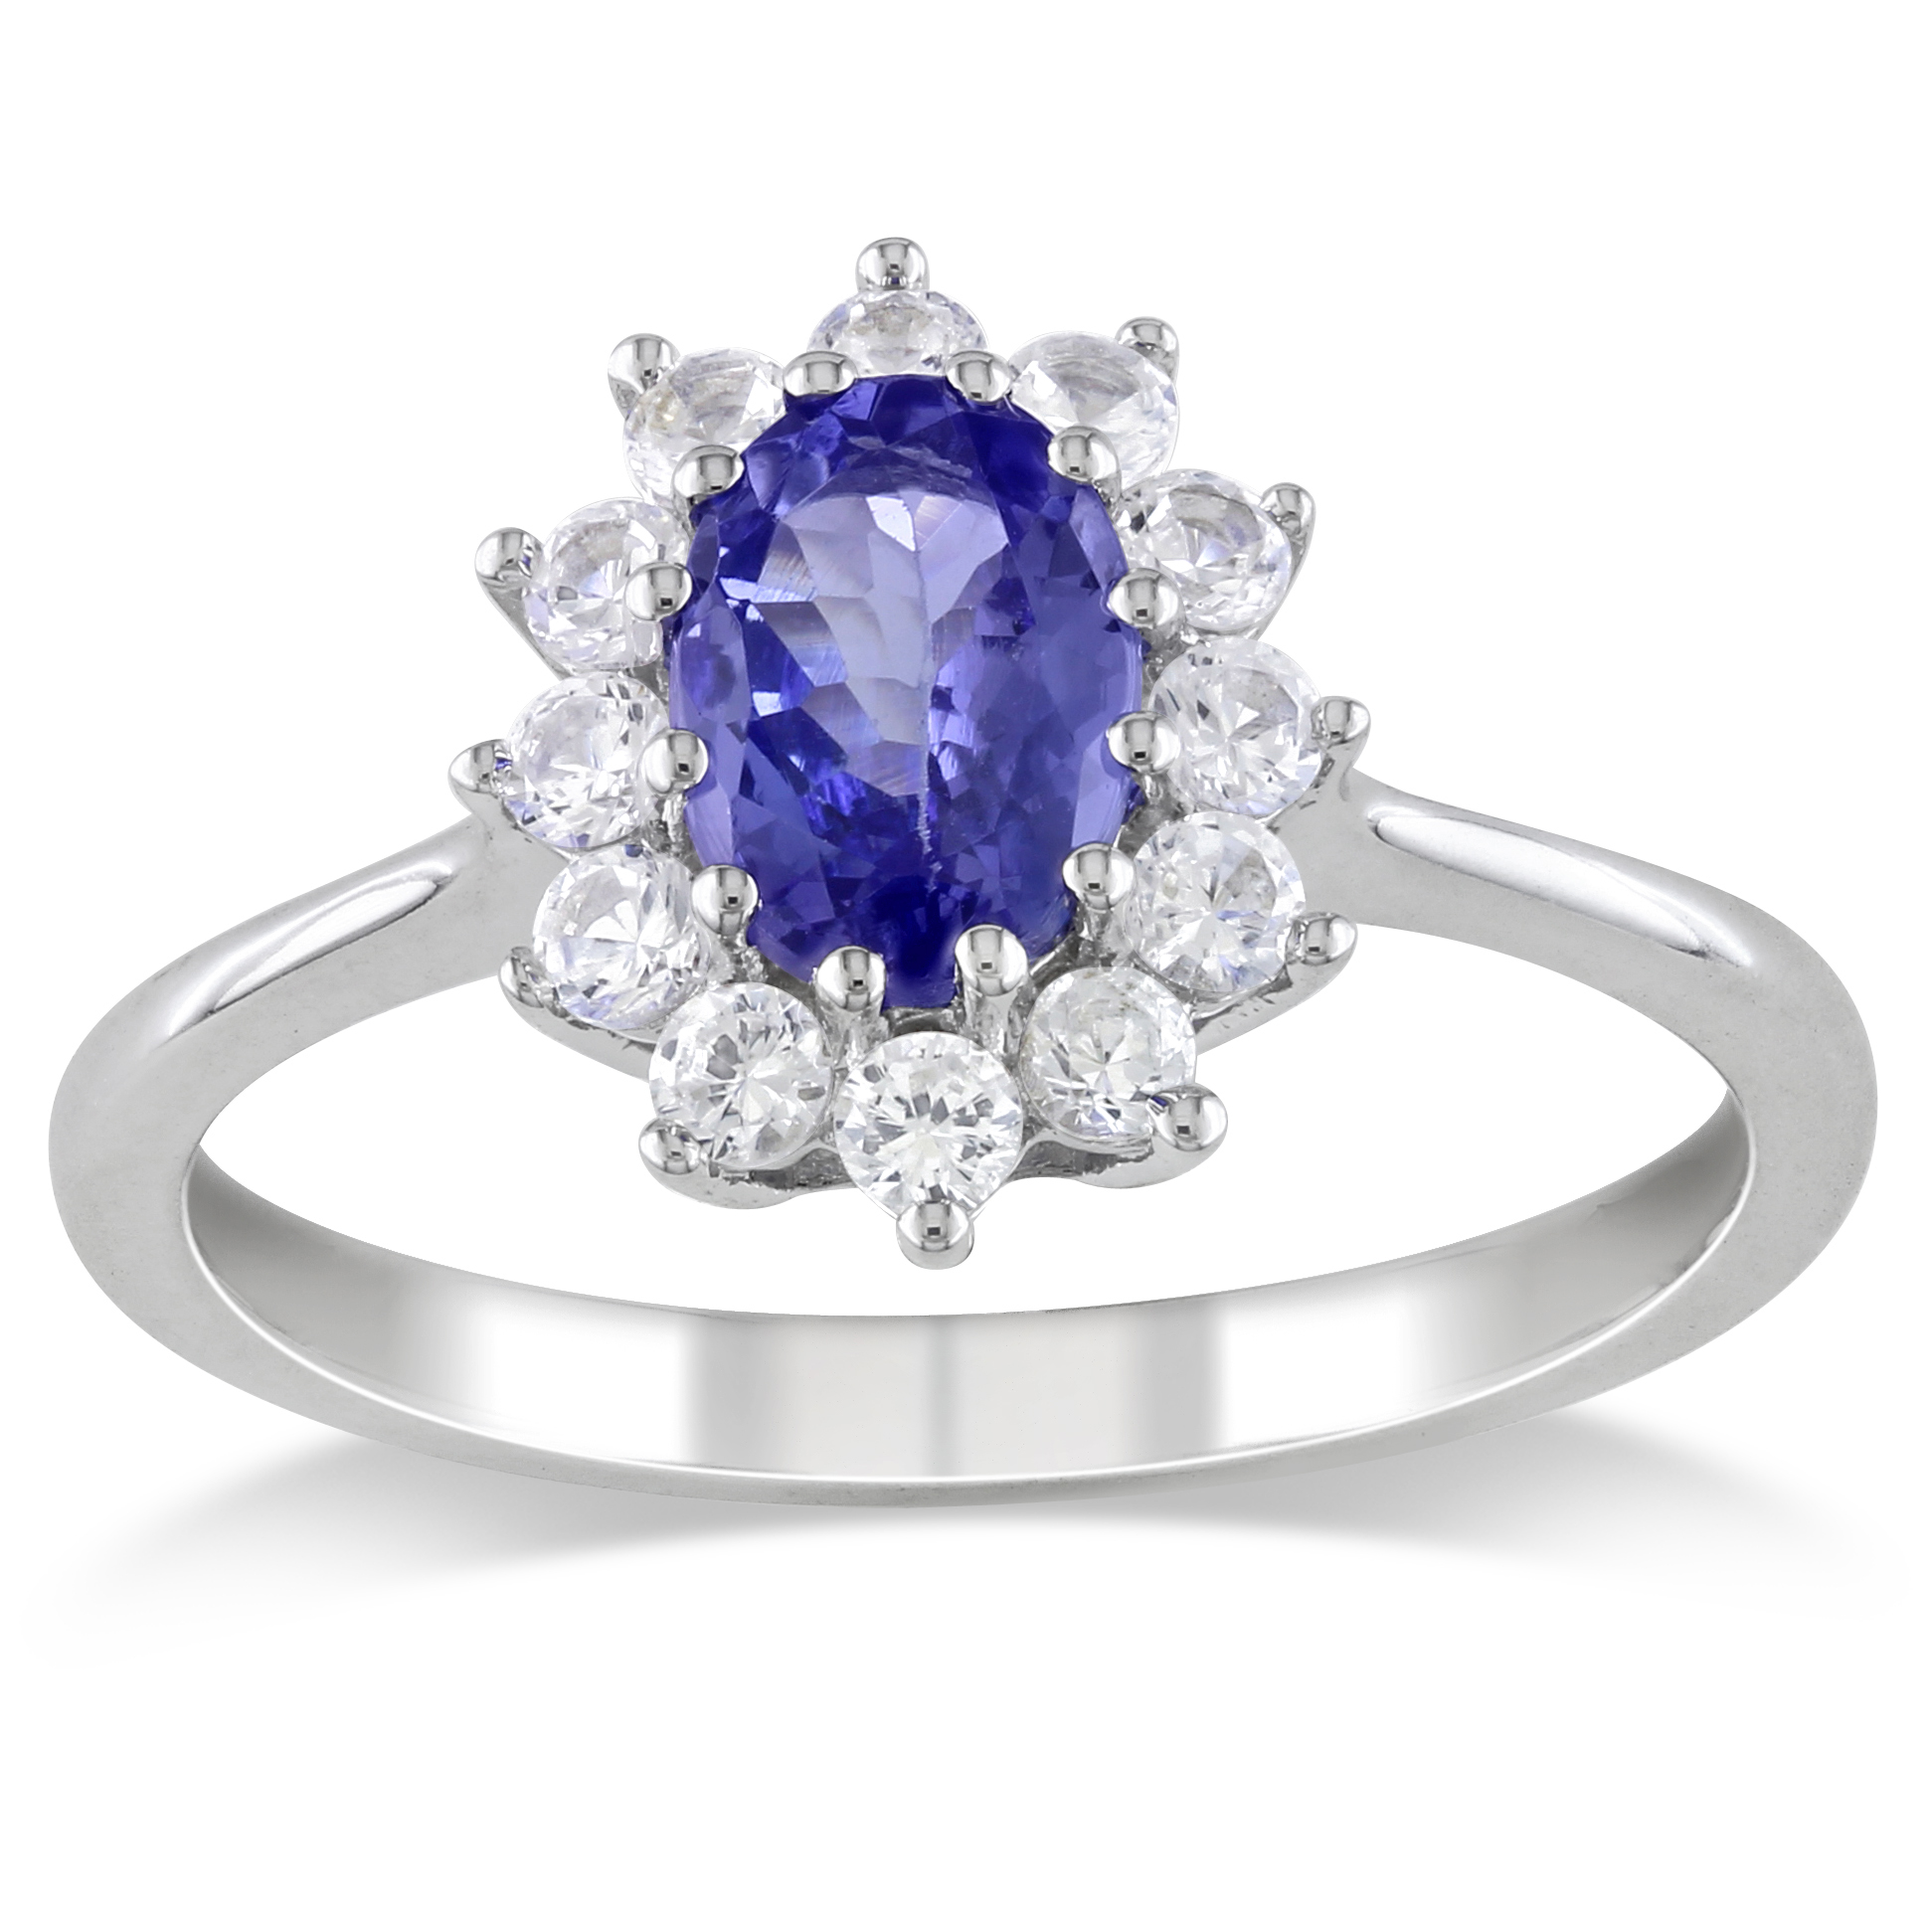 Amour 1 1/4 Carat T.G.W. Tanzanite Created White Sapphire Fashion Ring in Sterling Silver